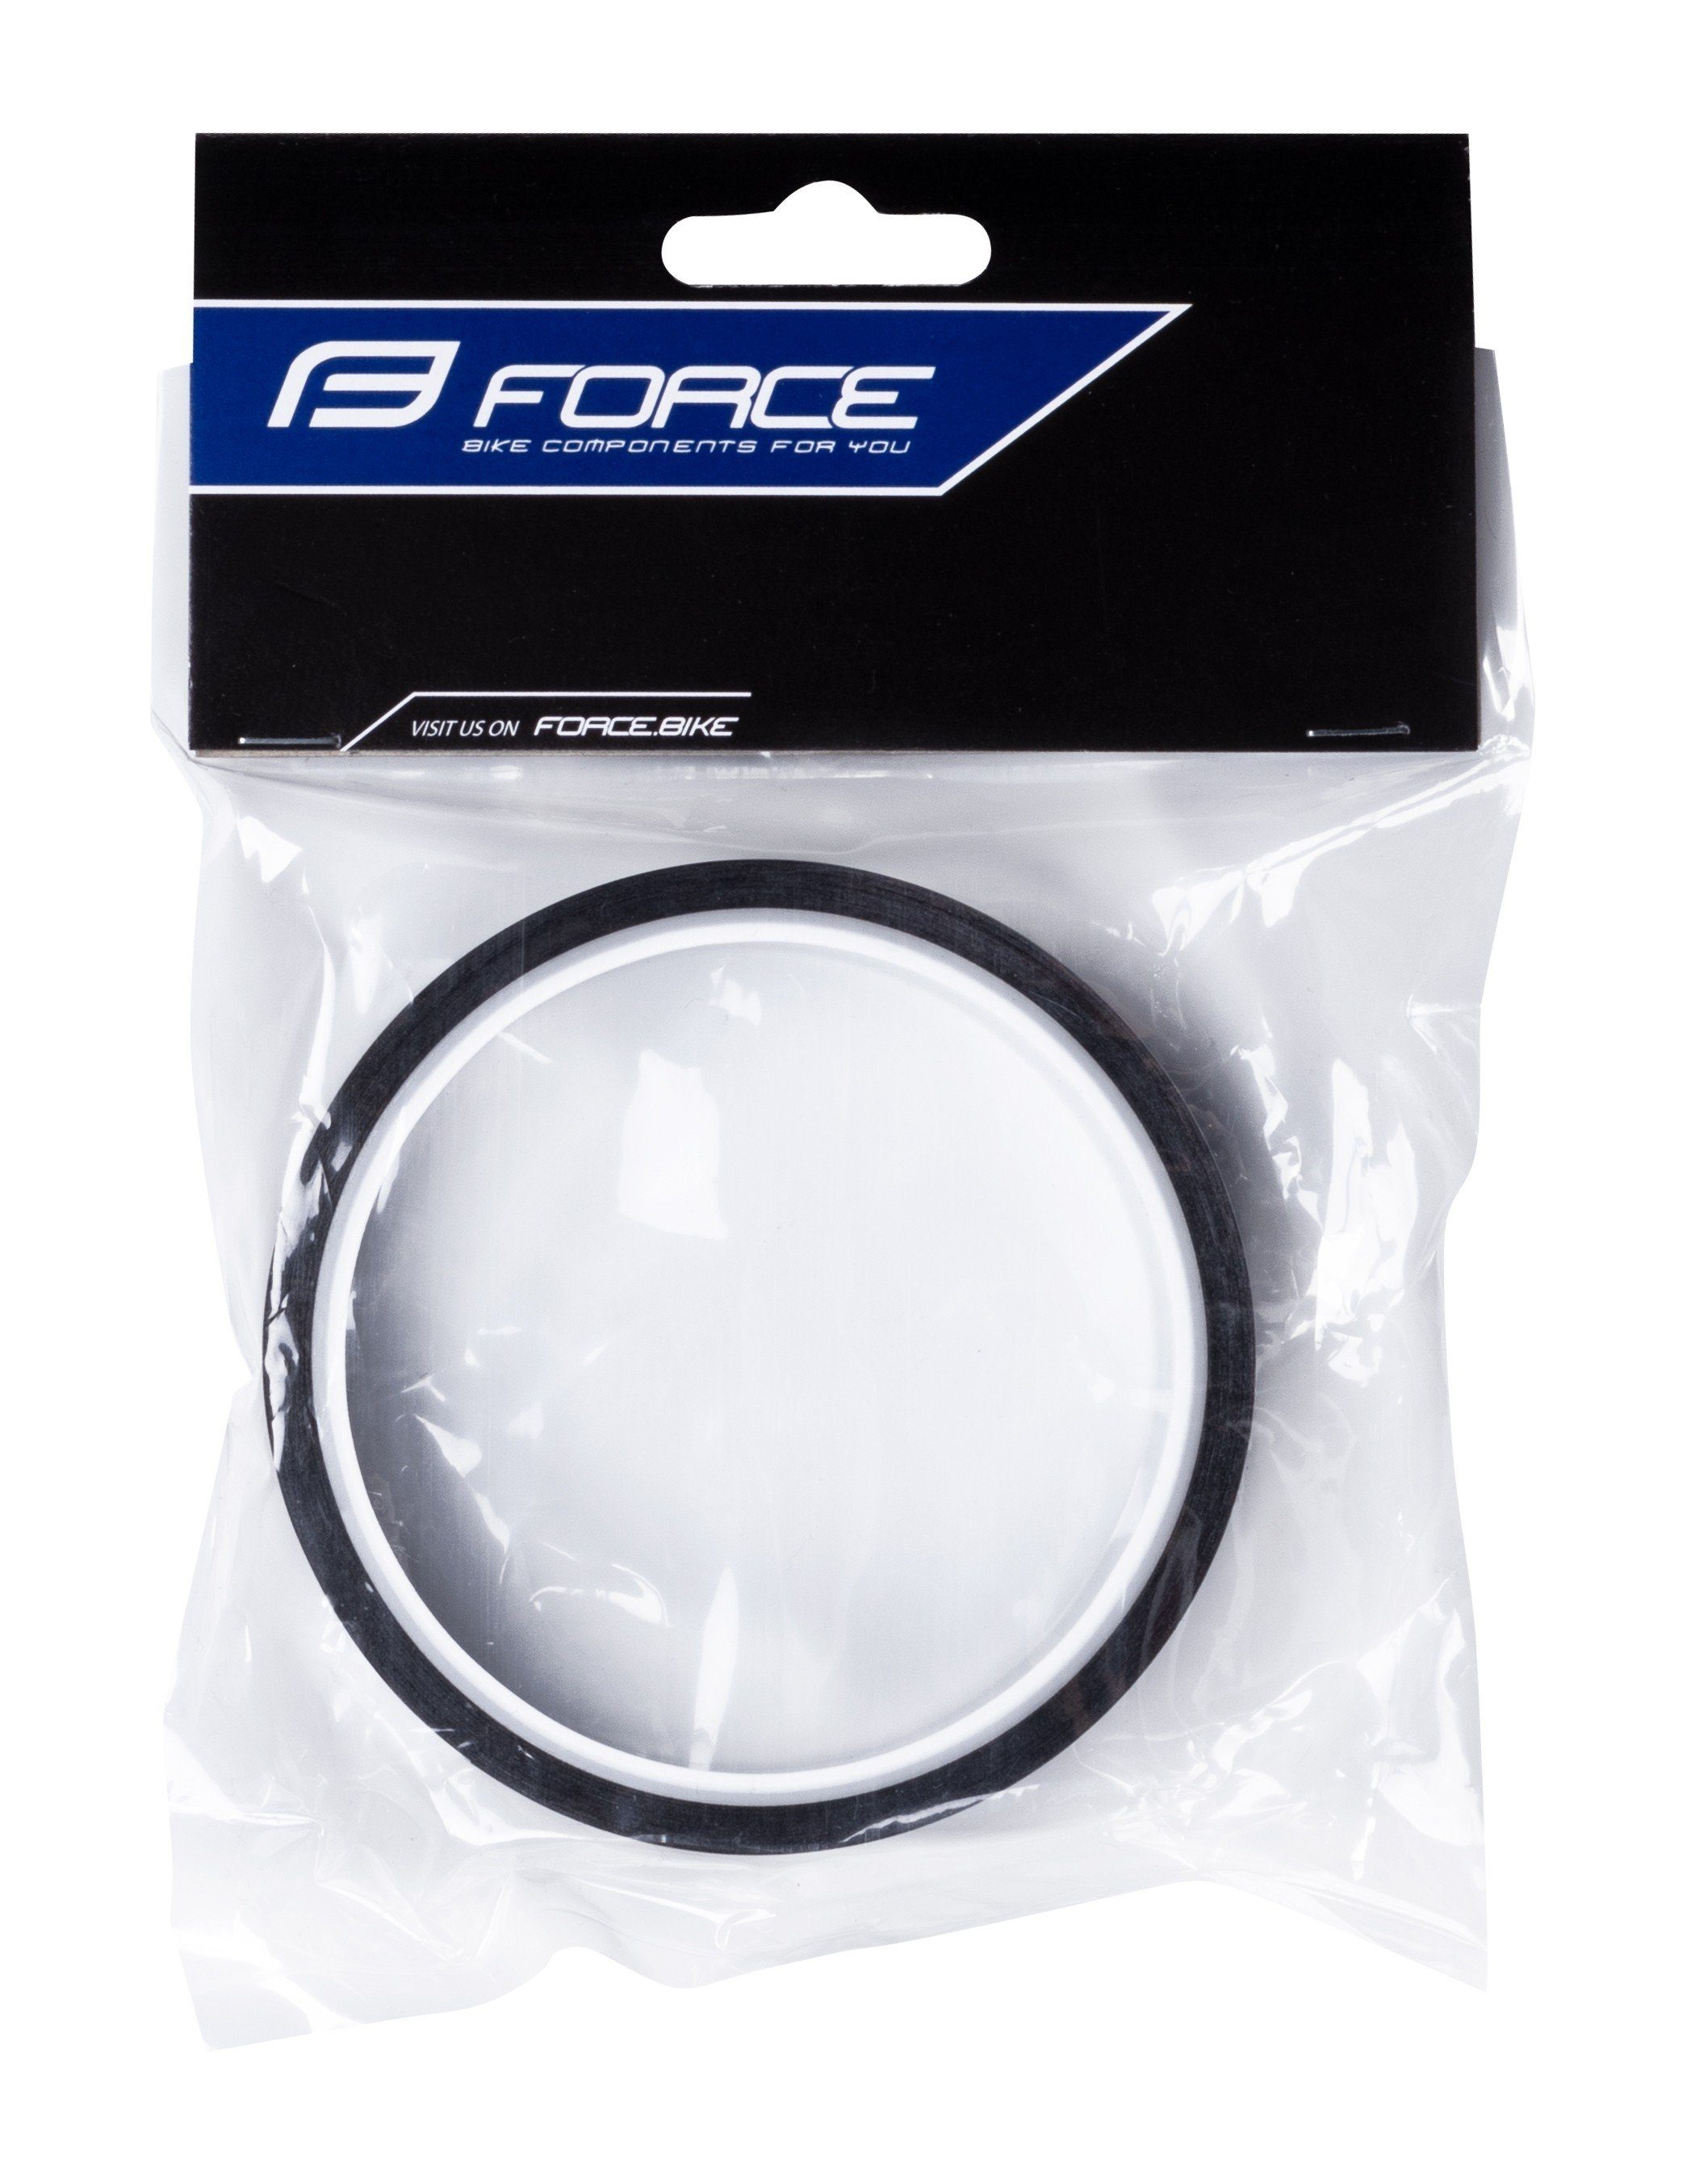 FORCE Fahrradschlauch 25mm rim FORCE Tubeless 10m self-adhesive x tape